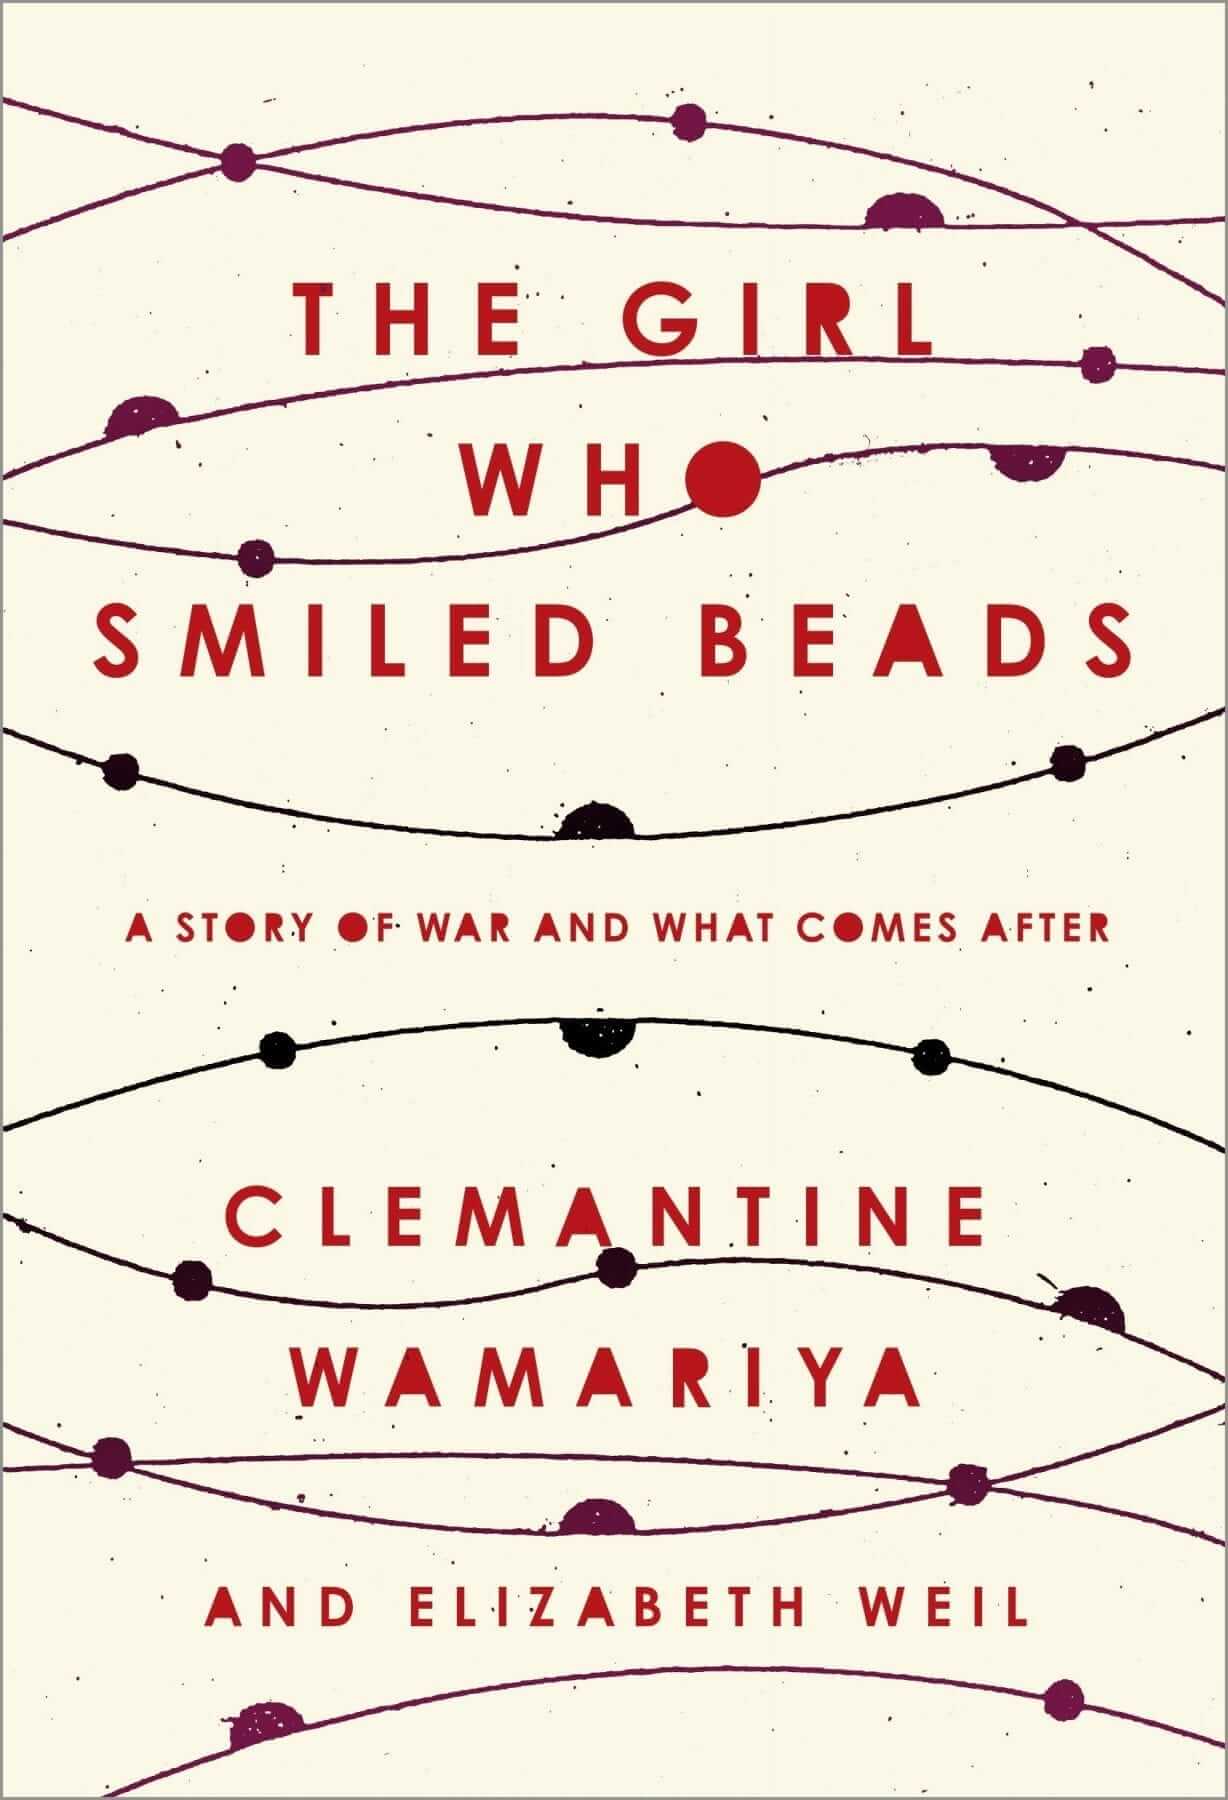 Cover of The Girl Who Smiled Beads by Clemantine Wamariya and Elizabeth Weil 